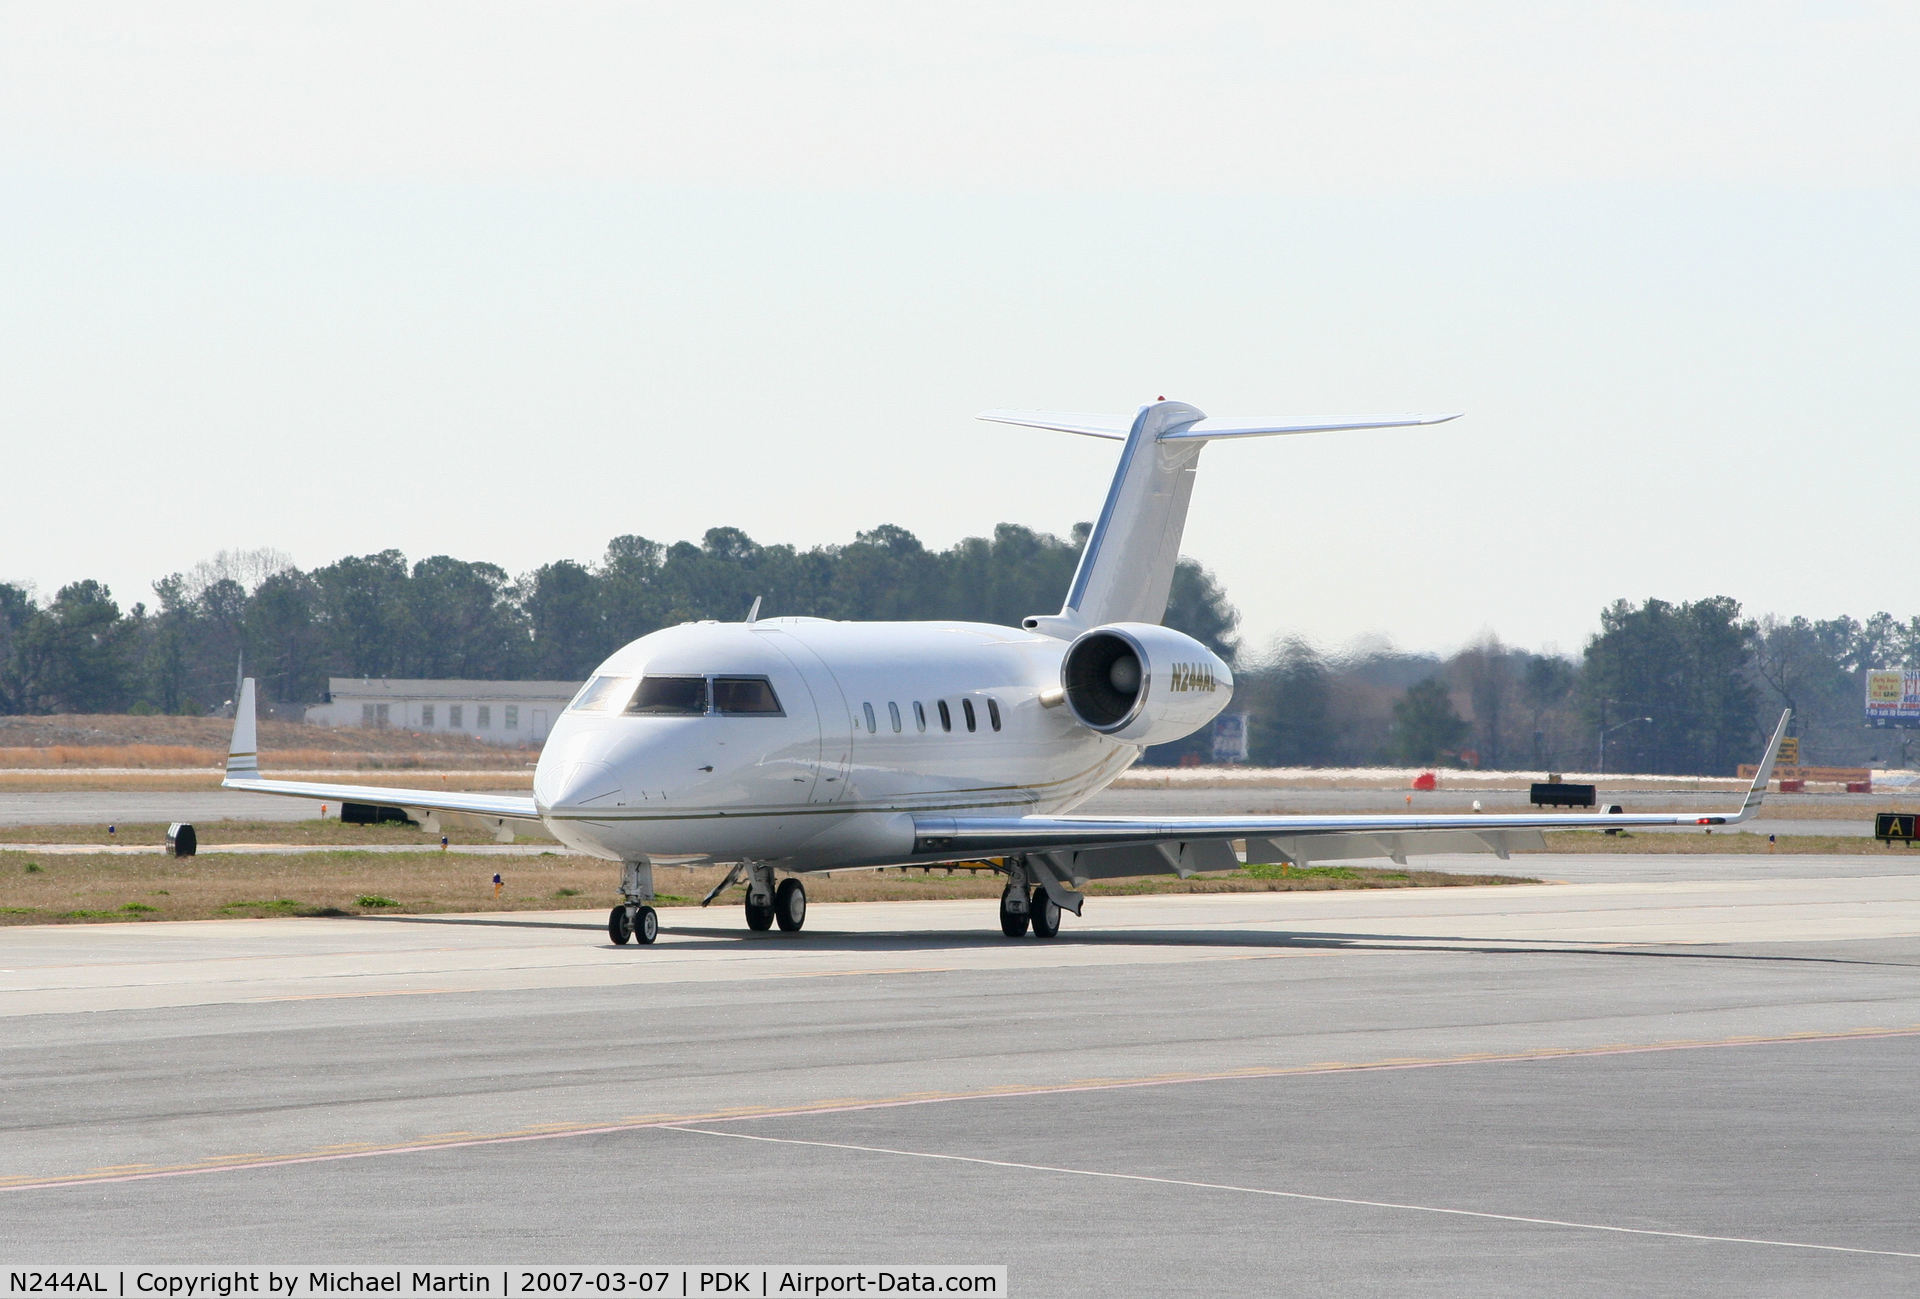 N244AL, 1981 Canadair Challenger 600 (CL-600-1A11) C/N 1005, Taxing to Signature Flight Services